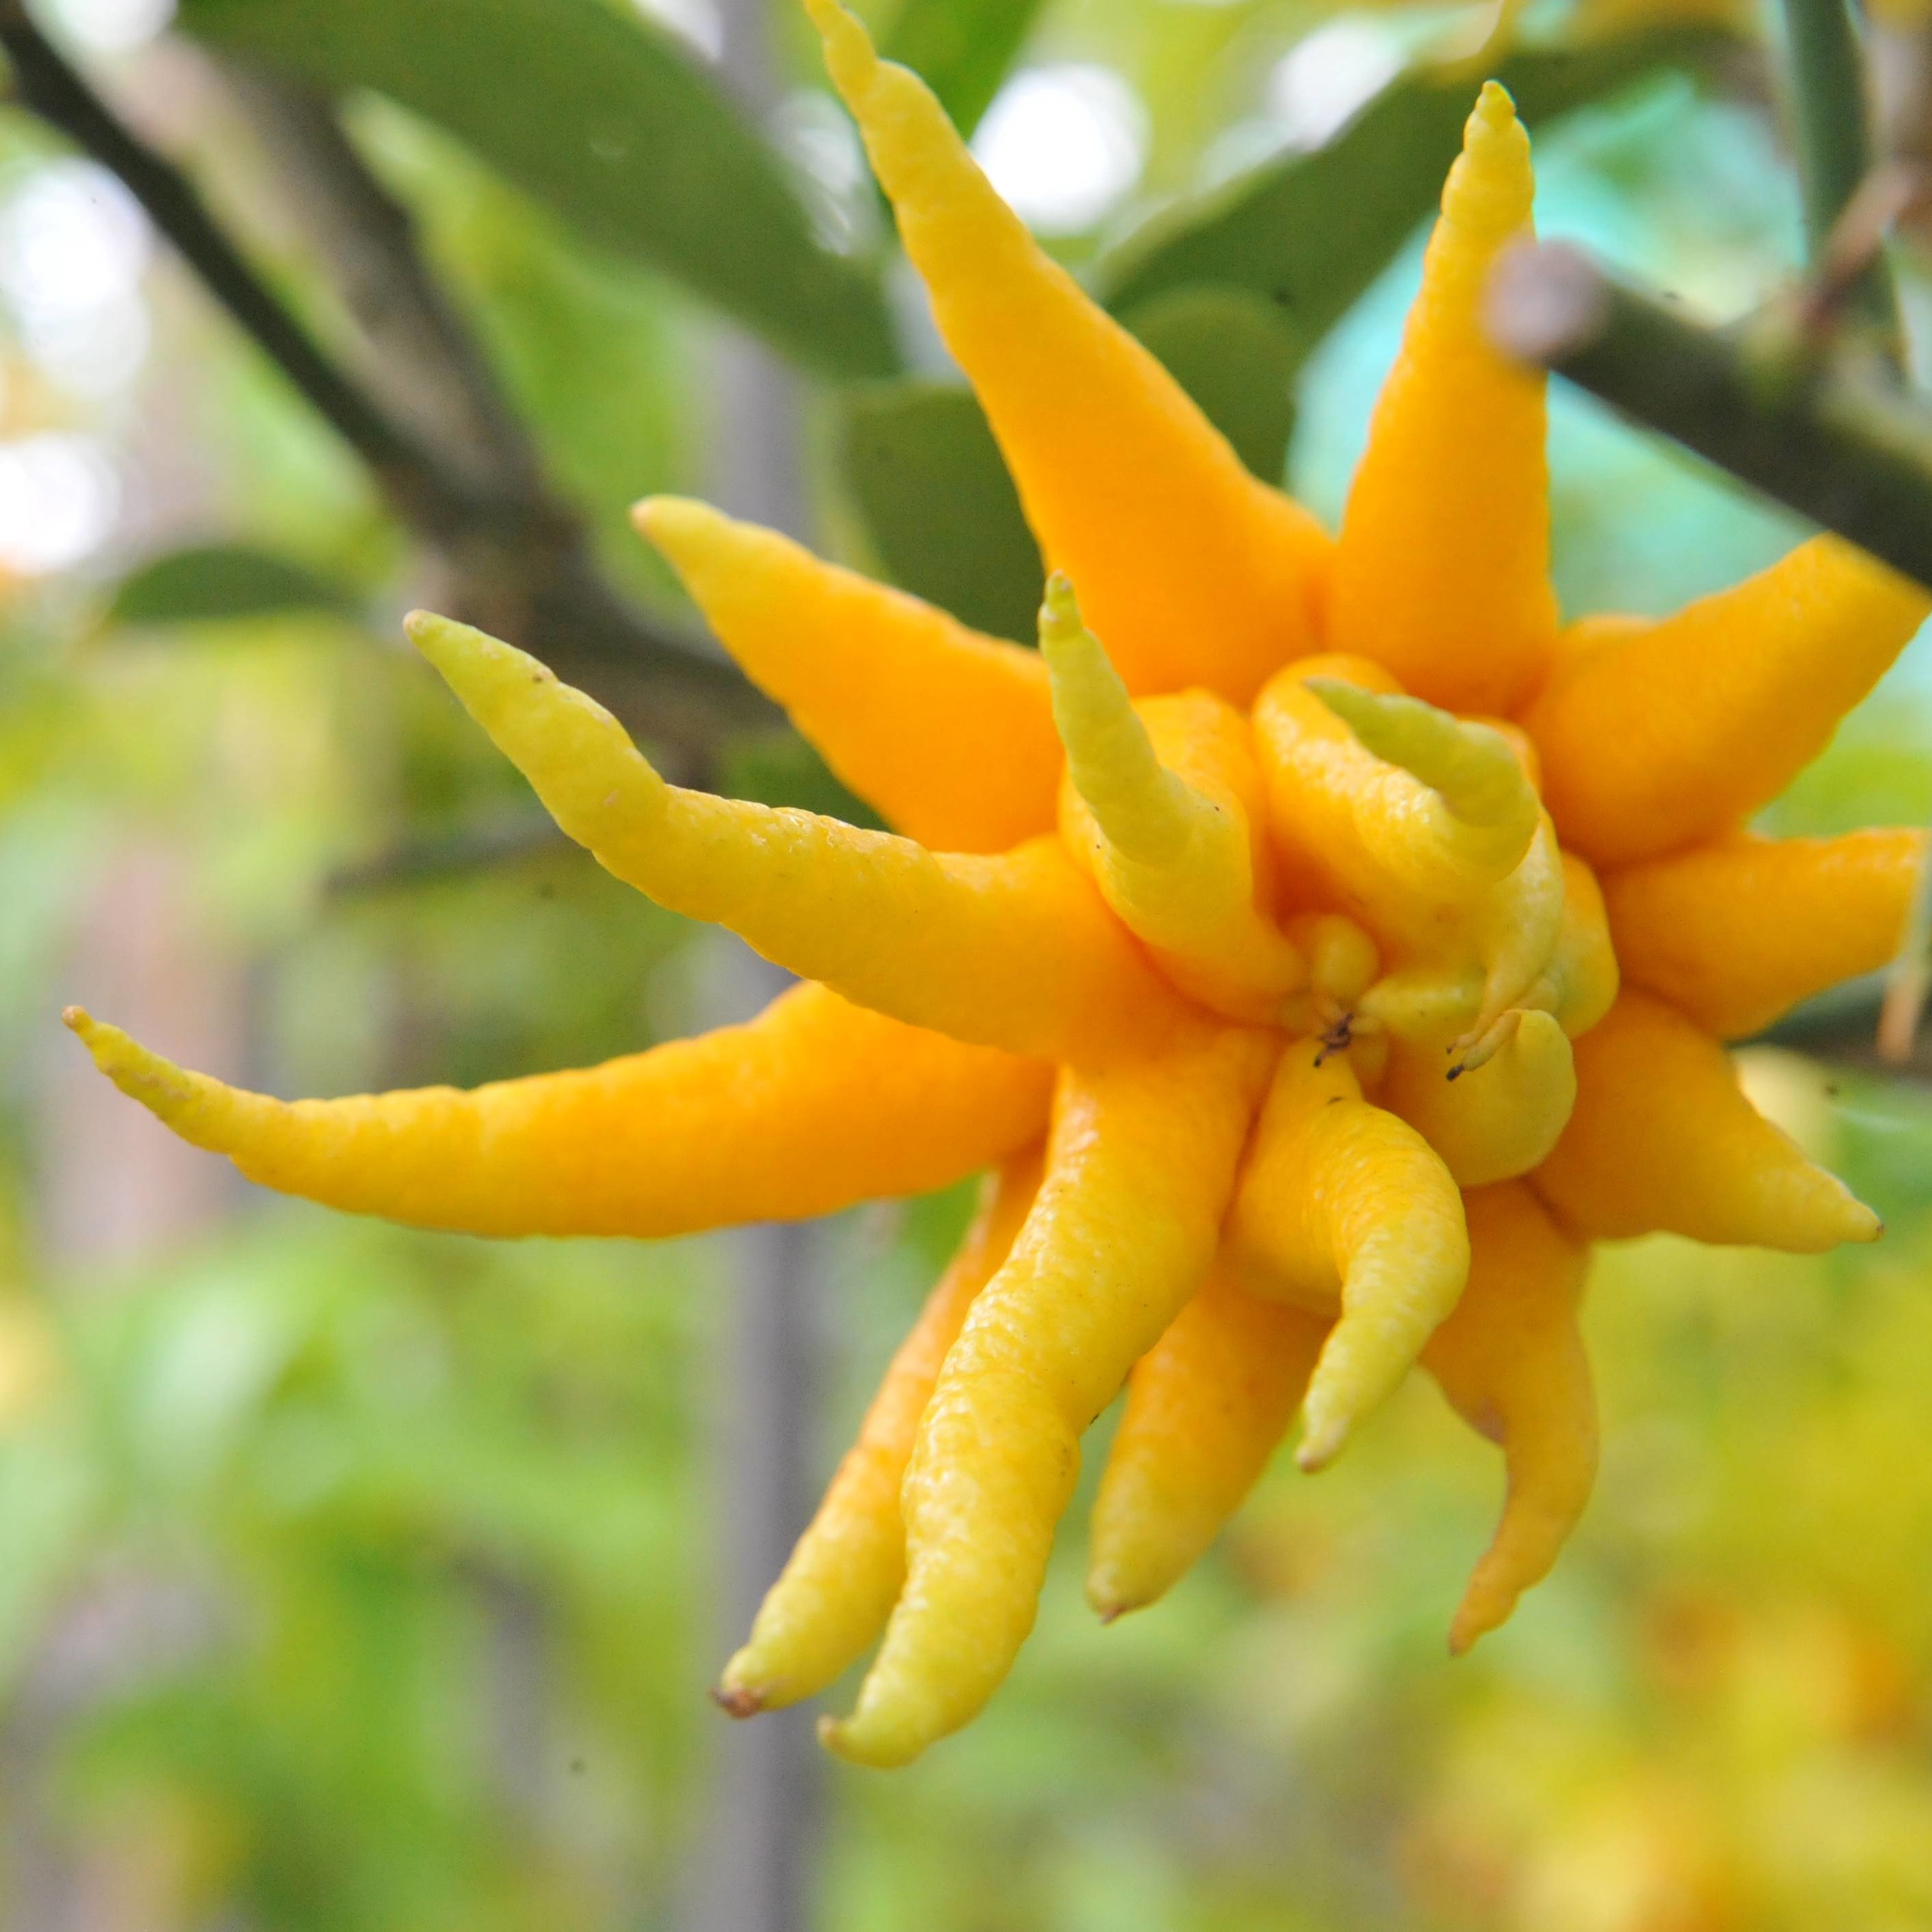 Buddhas Hand - a special kind of citrus fruit